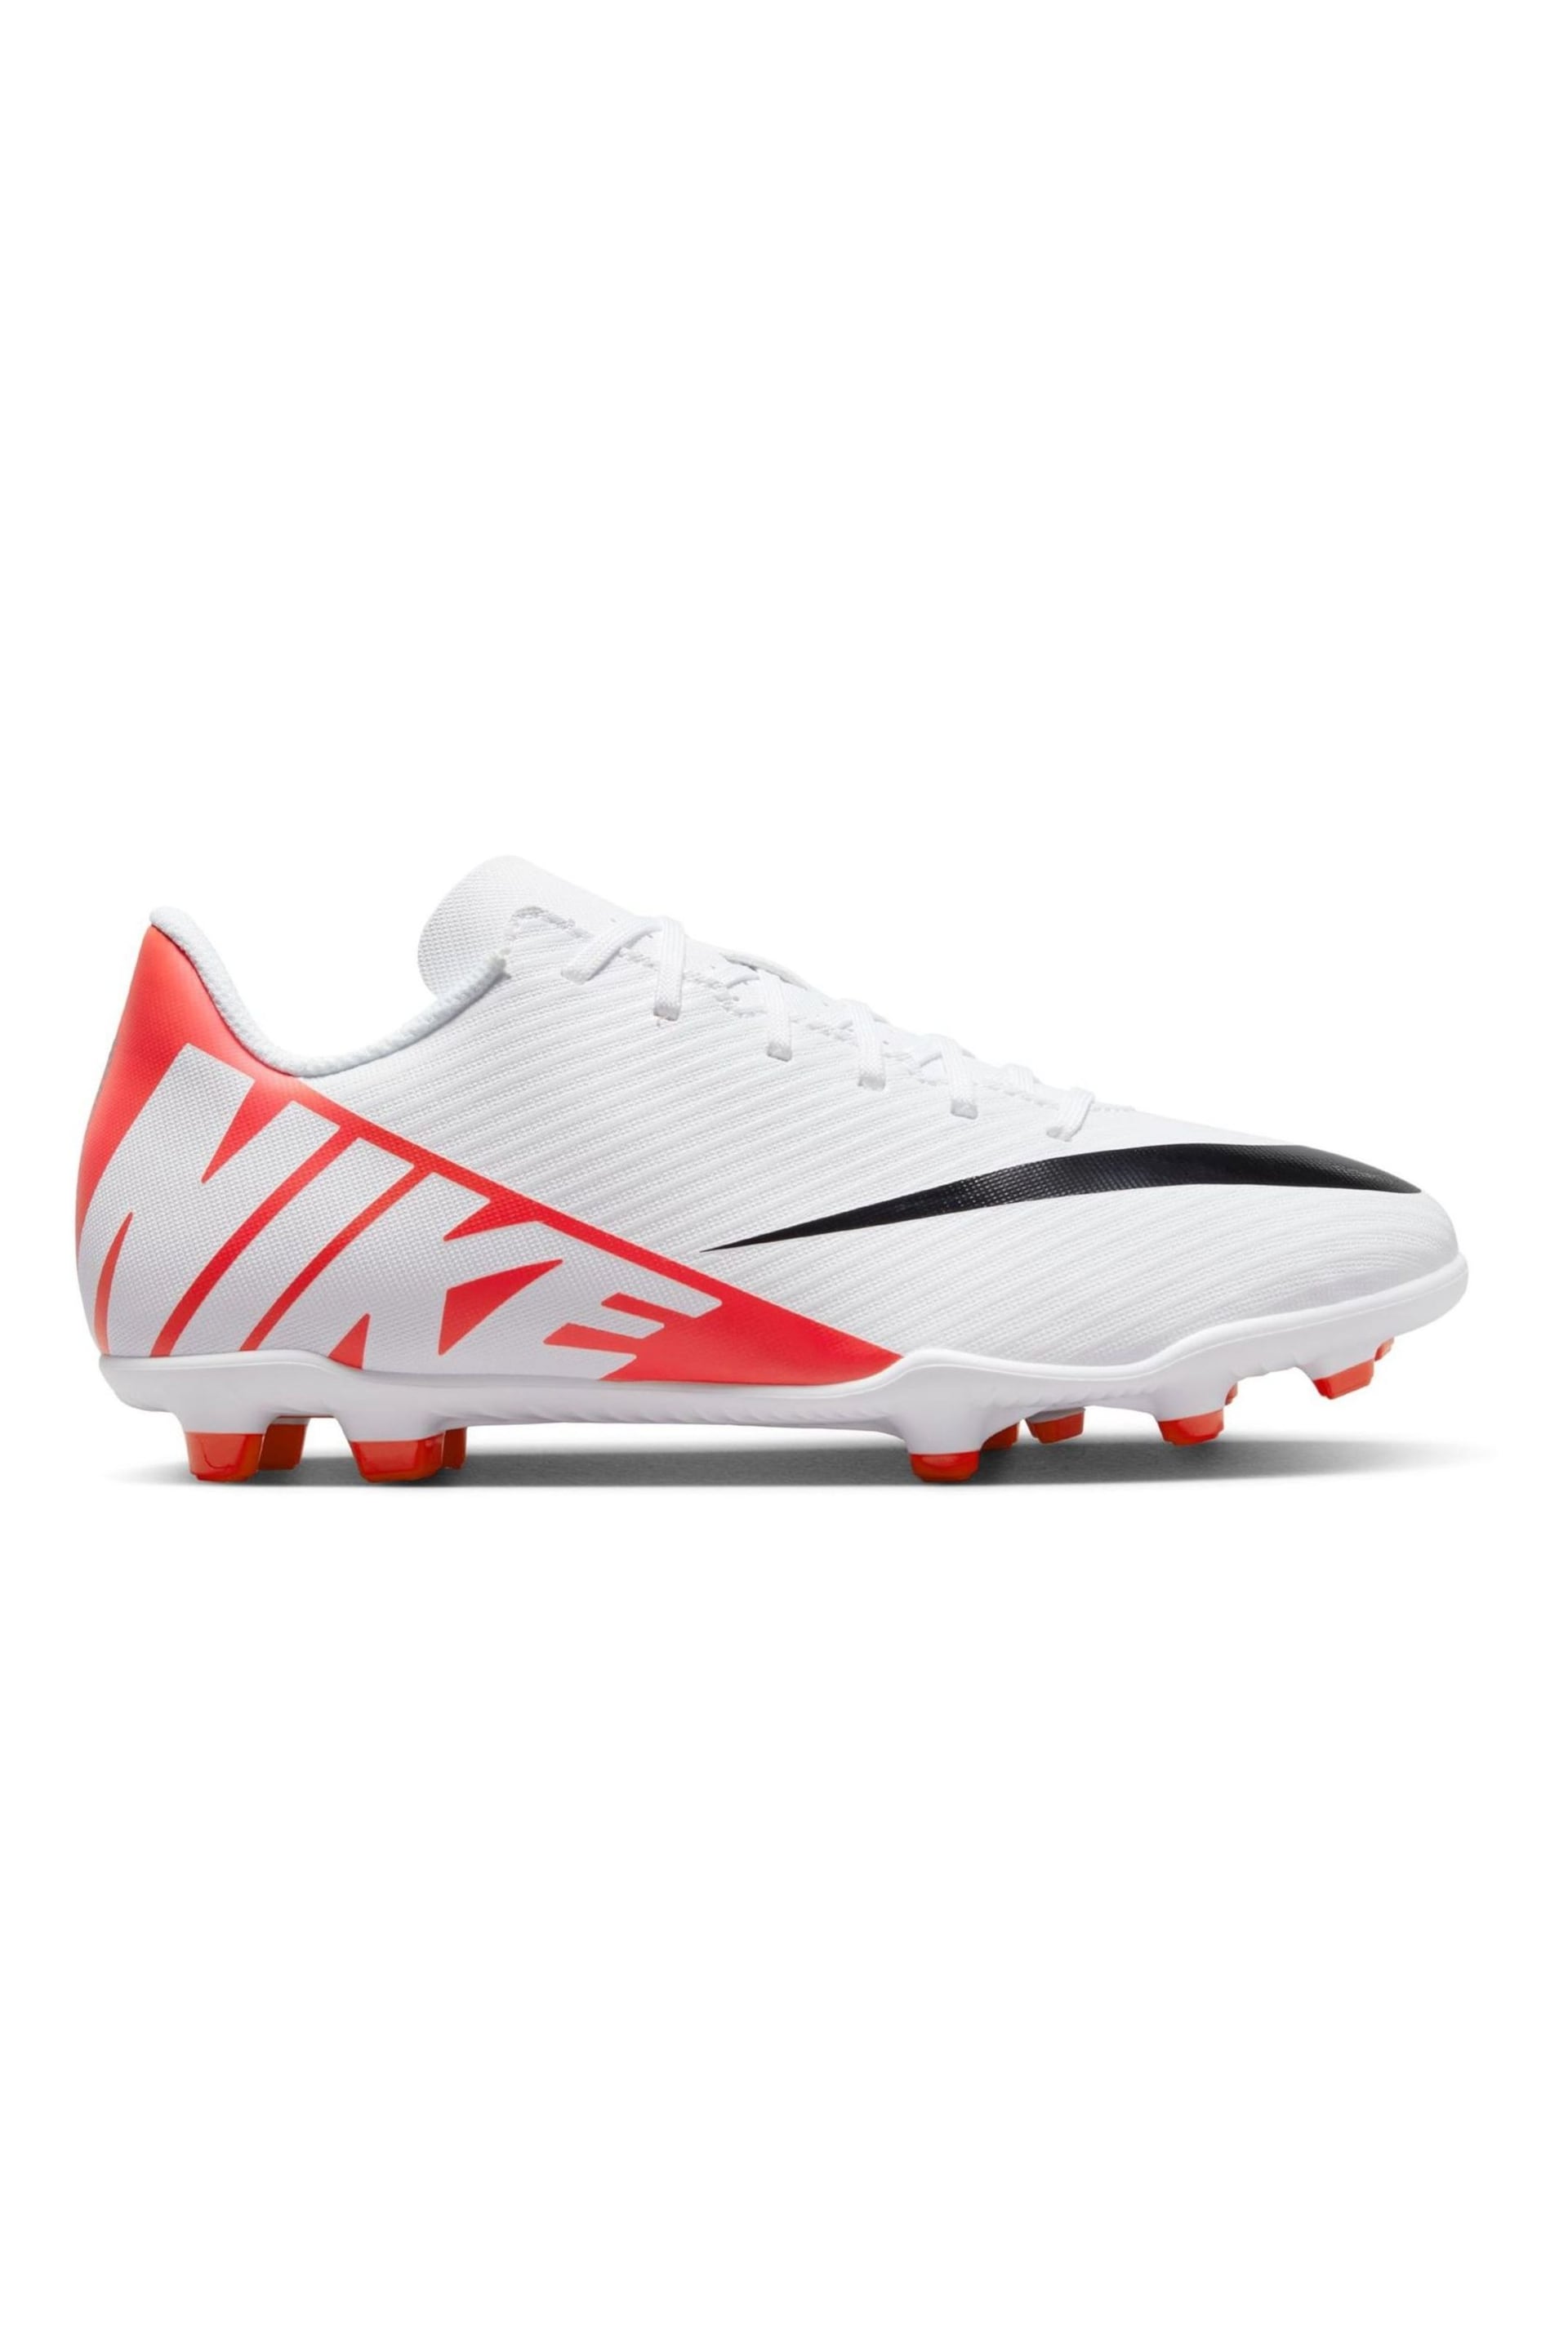 Nike Jr. Red Mercurial Vapor 15 Club Firm Ground Football Boots - Image 1 of 11